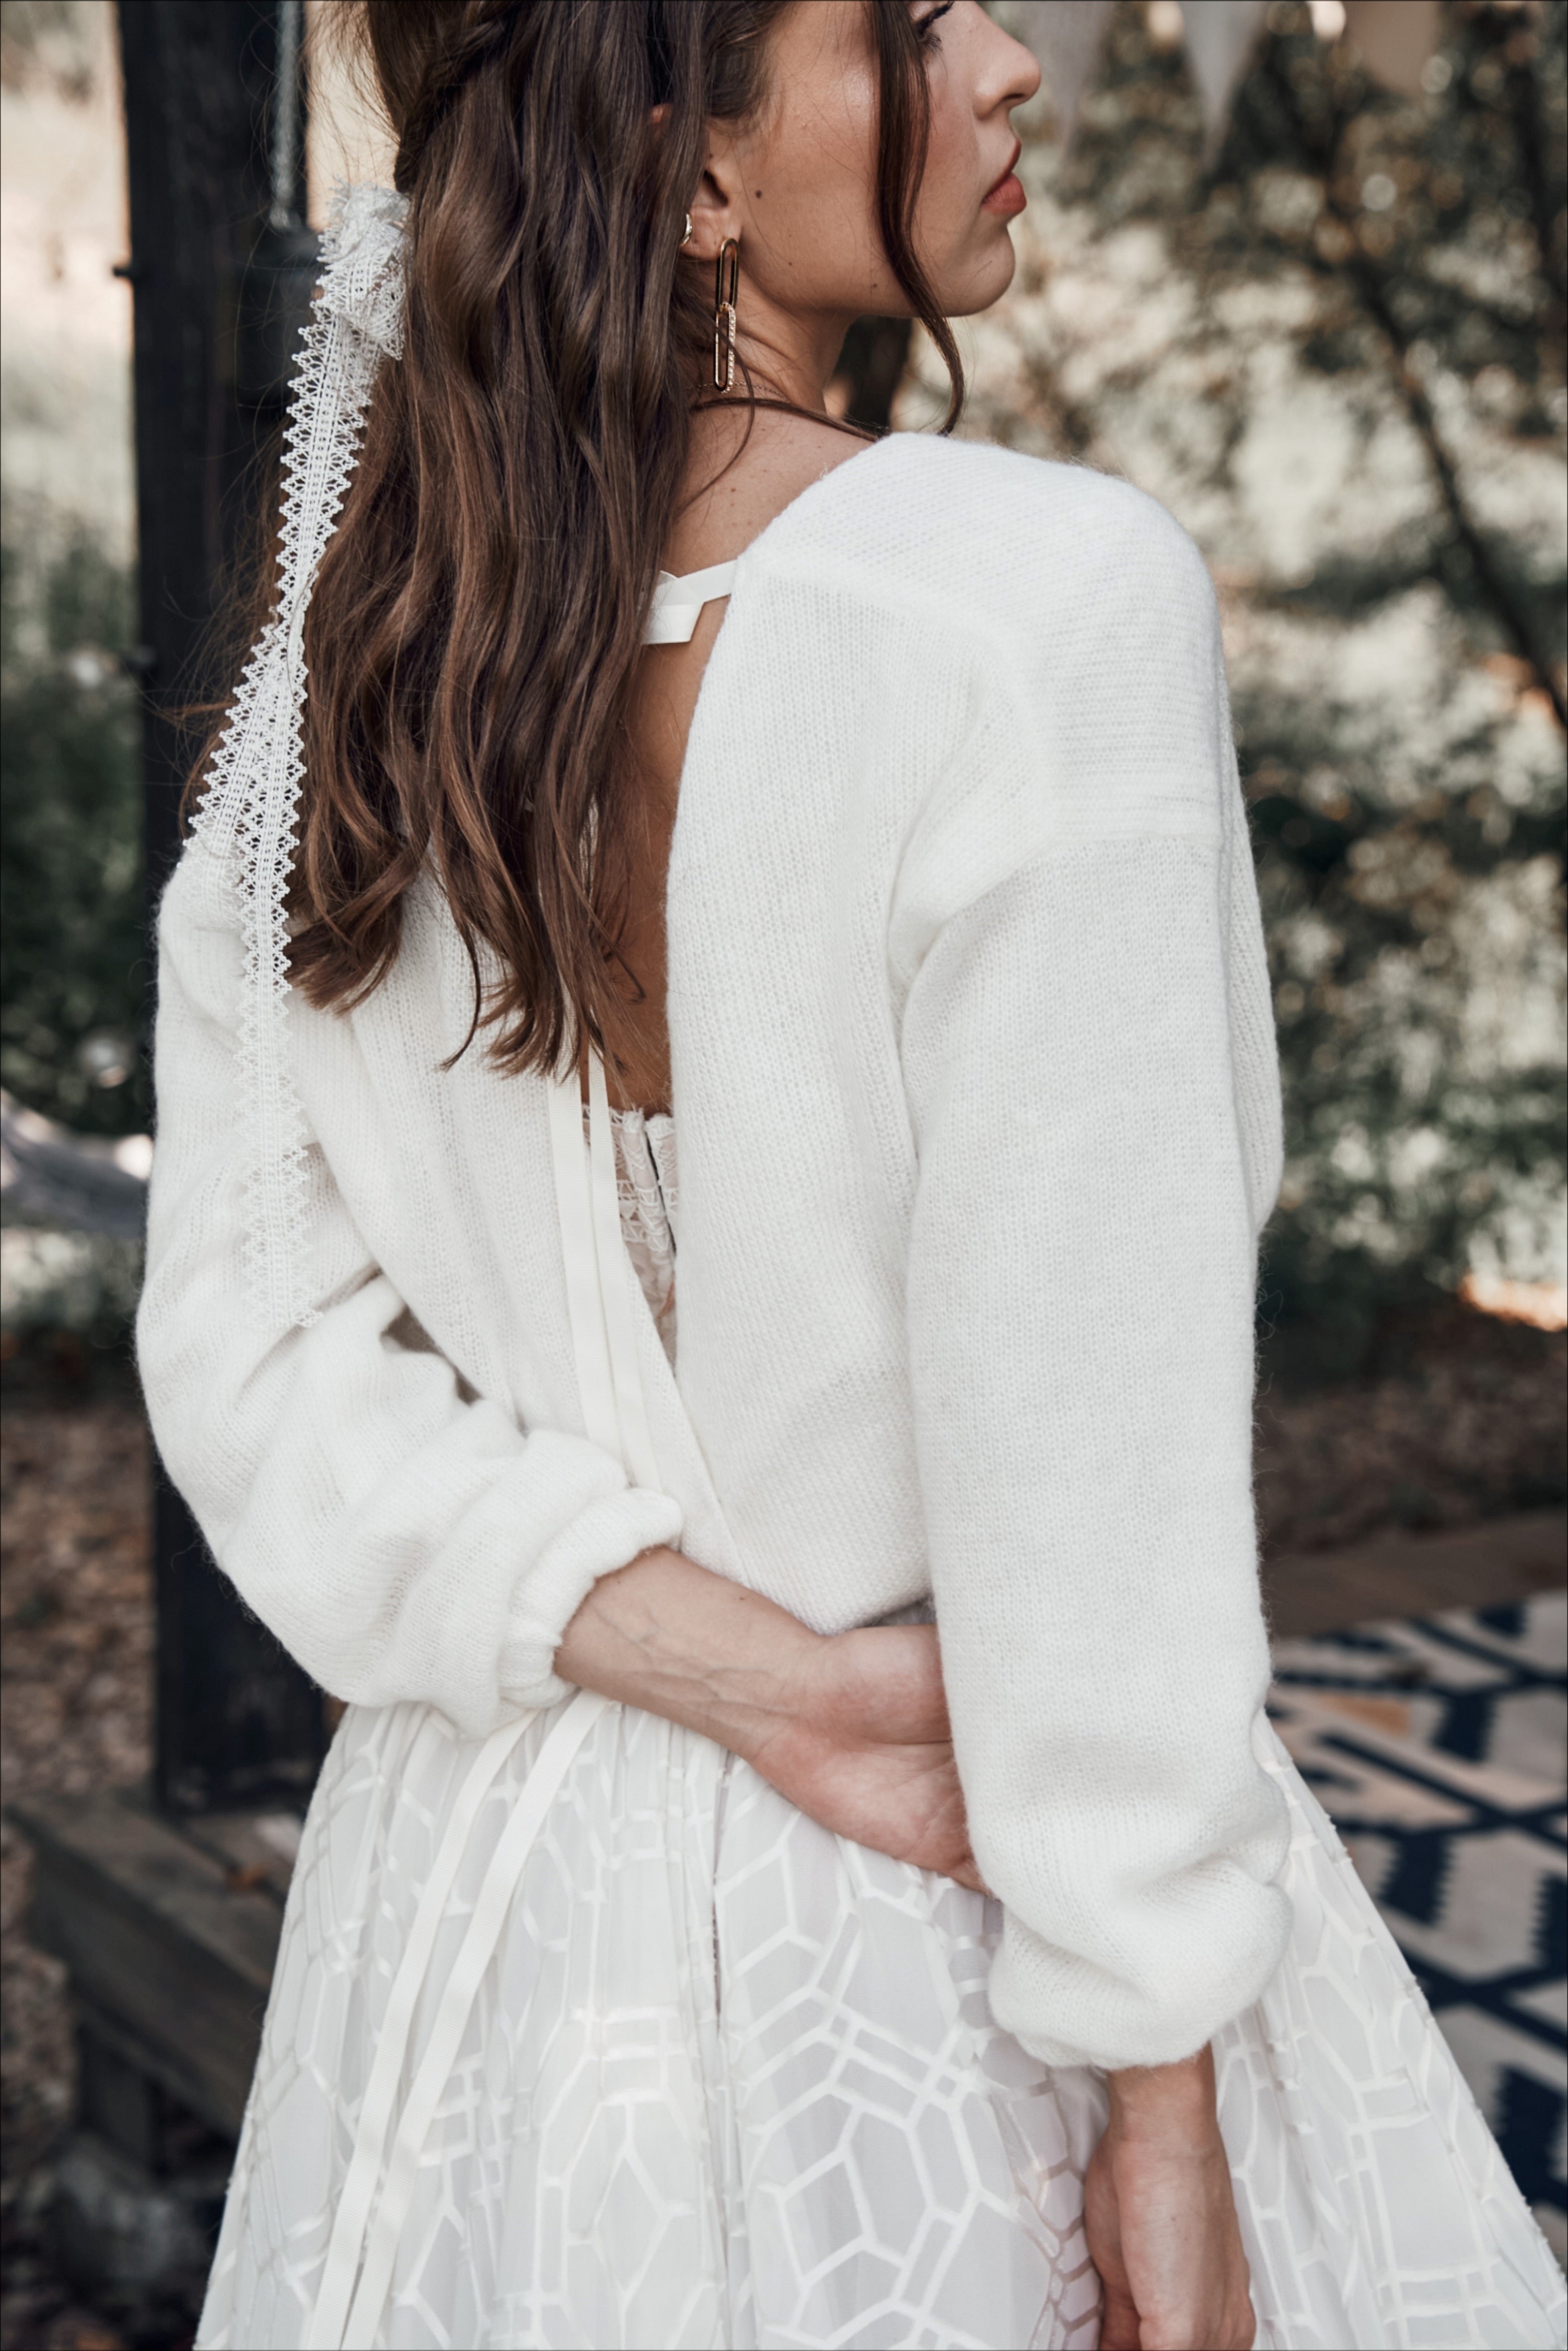 Ivory-colored wedding pullover with ribbons at the back.